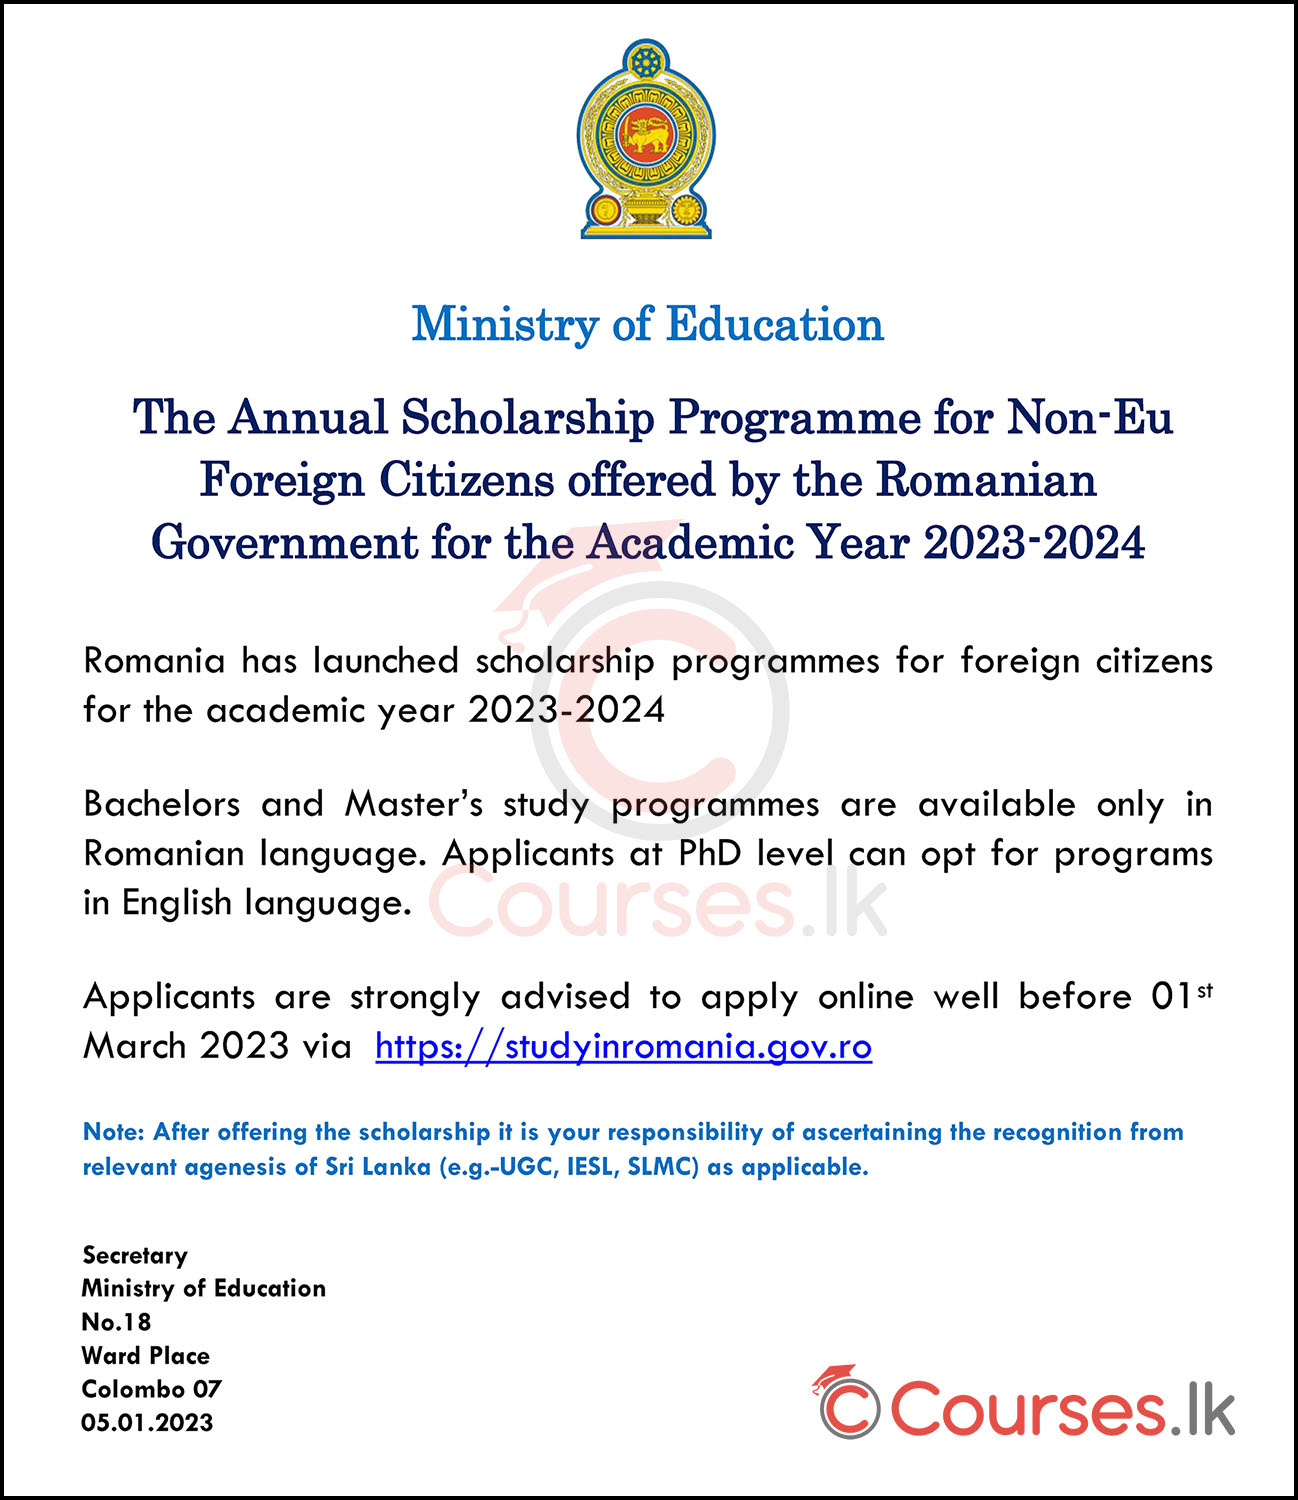 Romanian Government Scholarship for Non-Eu Foreign Citizens for Academic Year 2023-2024